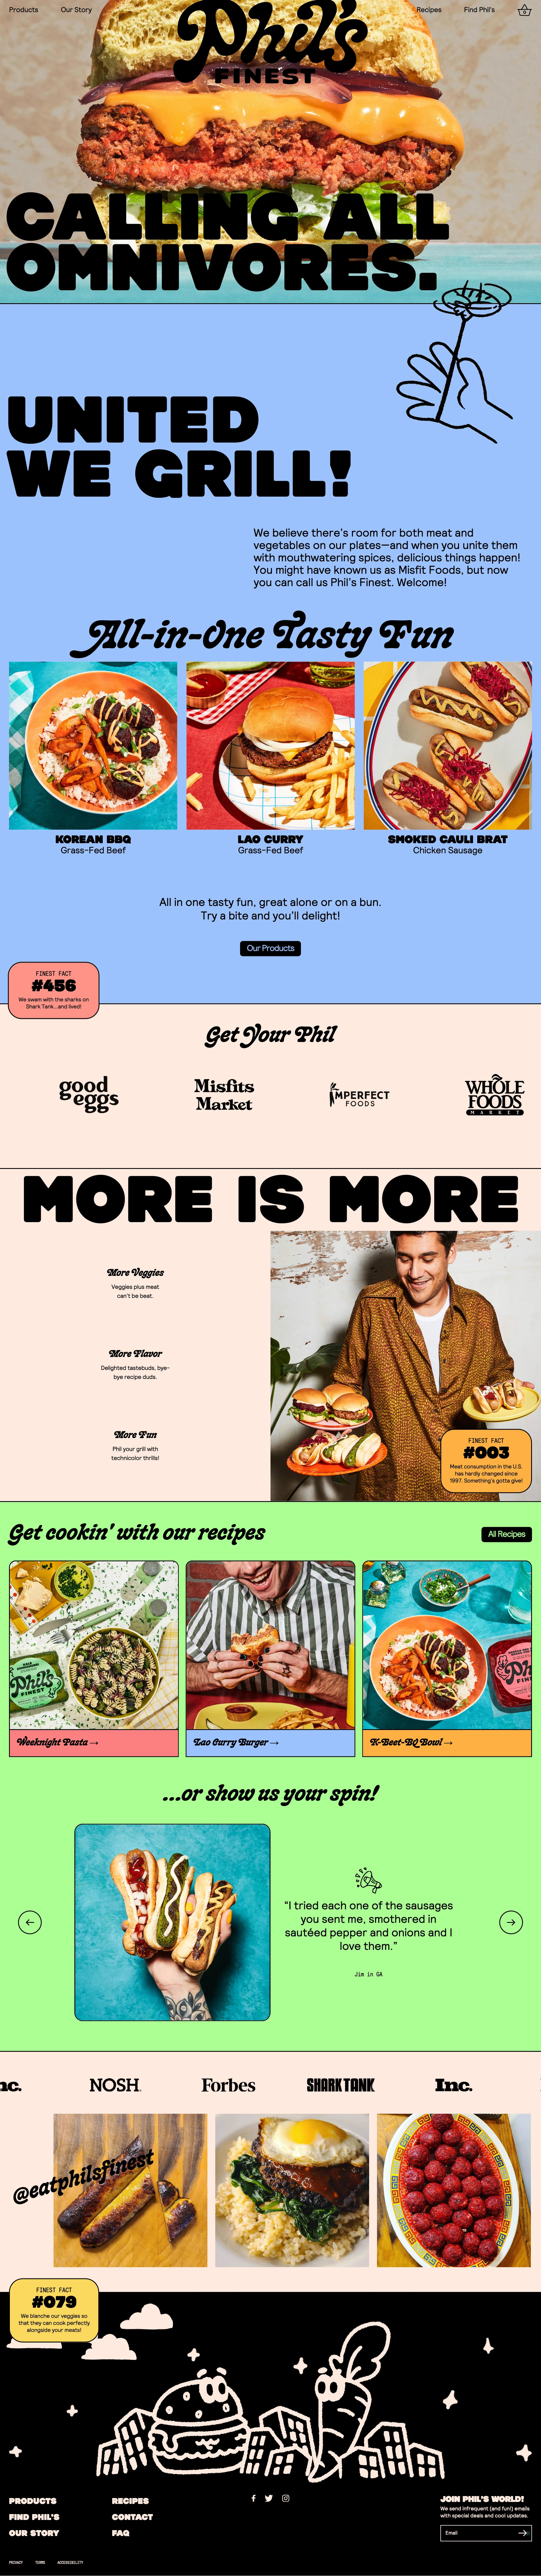 Phil's Finest Landing Page Example: We believe there’s room for both meat and vegetables on our plates—and when you unite them with mouthwatering spices, delicious things happen! You might have known us as Misfit Foods, but now you can call us Phil’s Finest. Welcome!